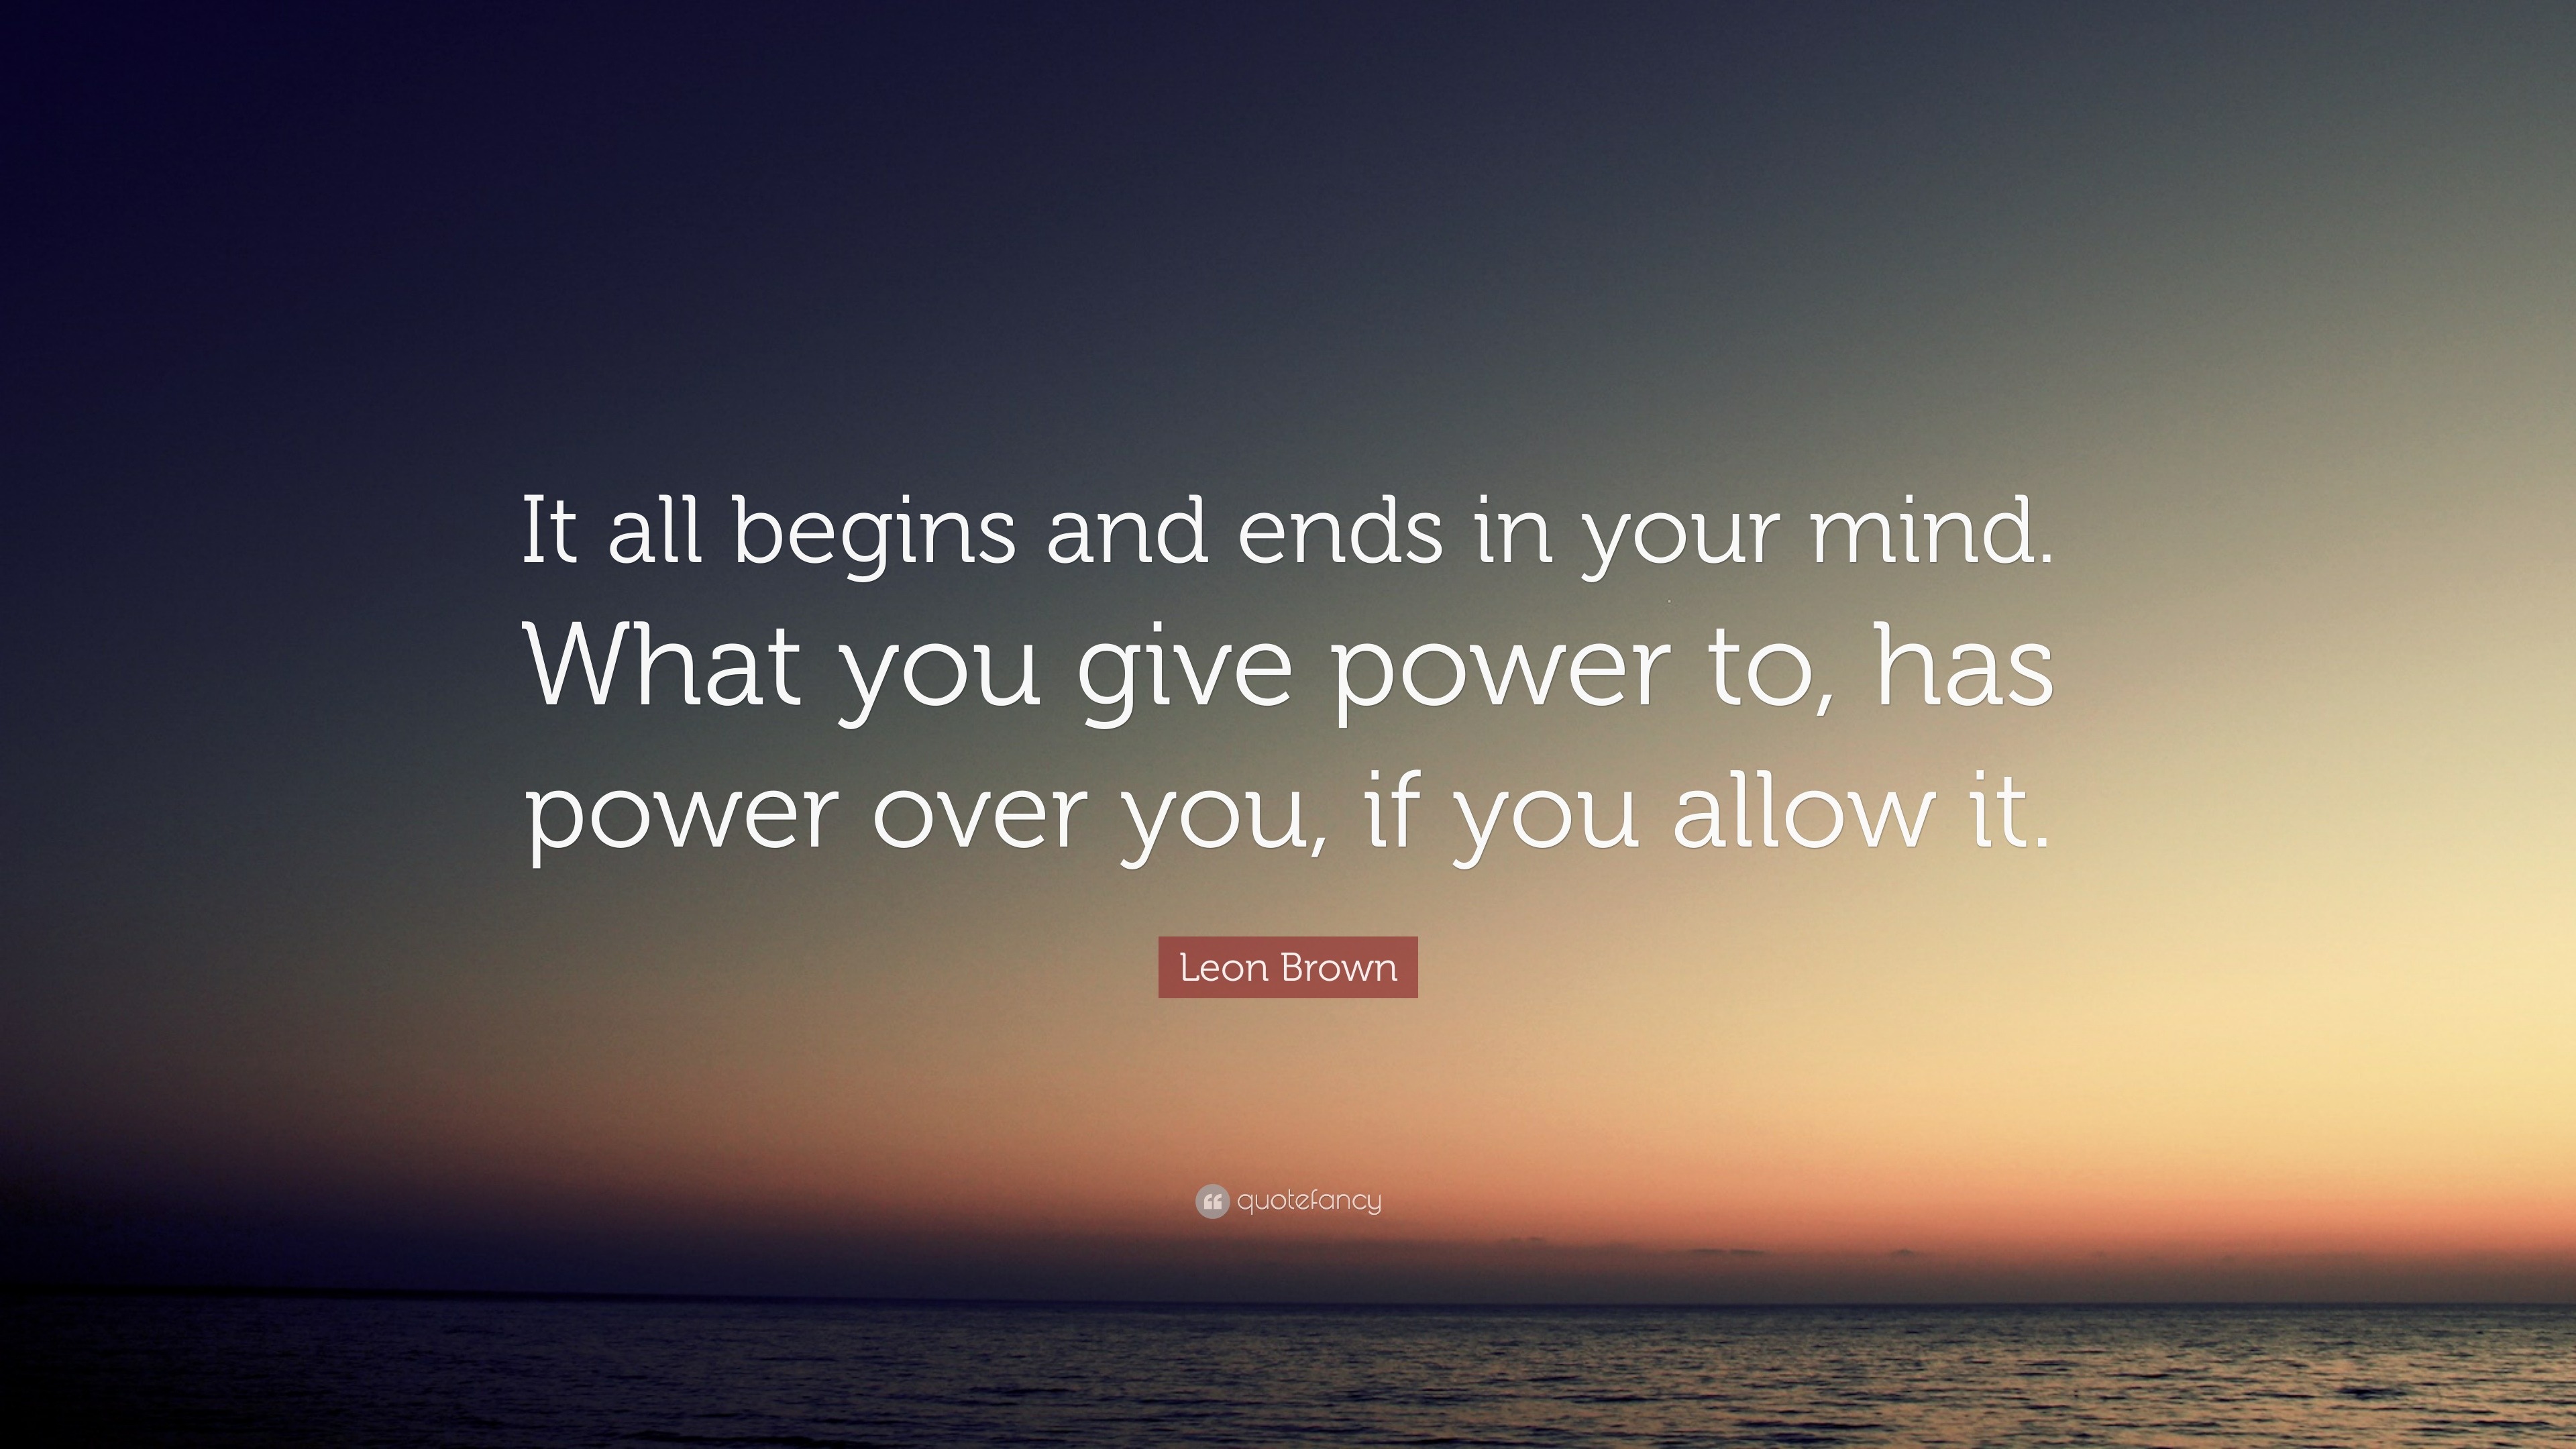 Leon Brown Quote: "It all begins and ends in your mind. What you give power to, has power over ...